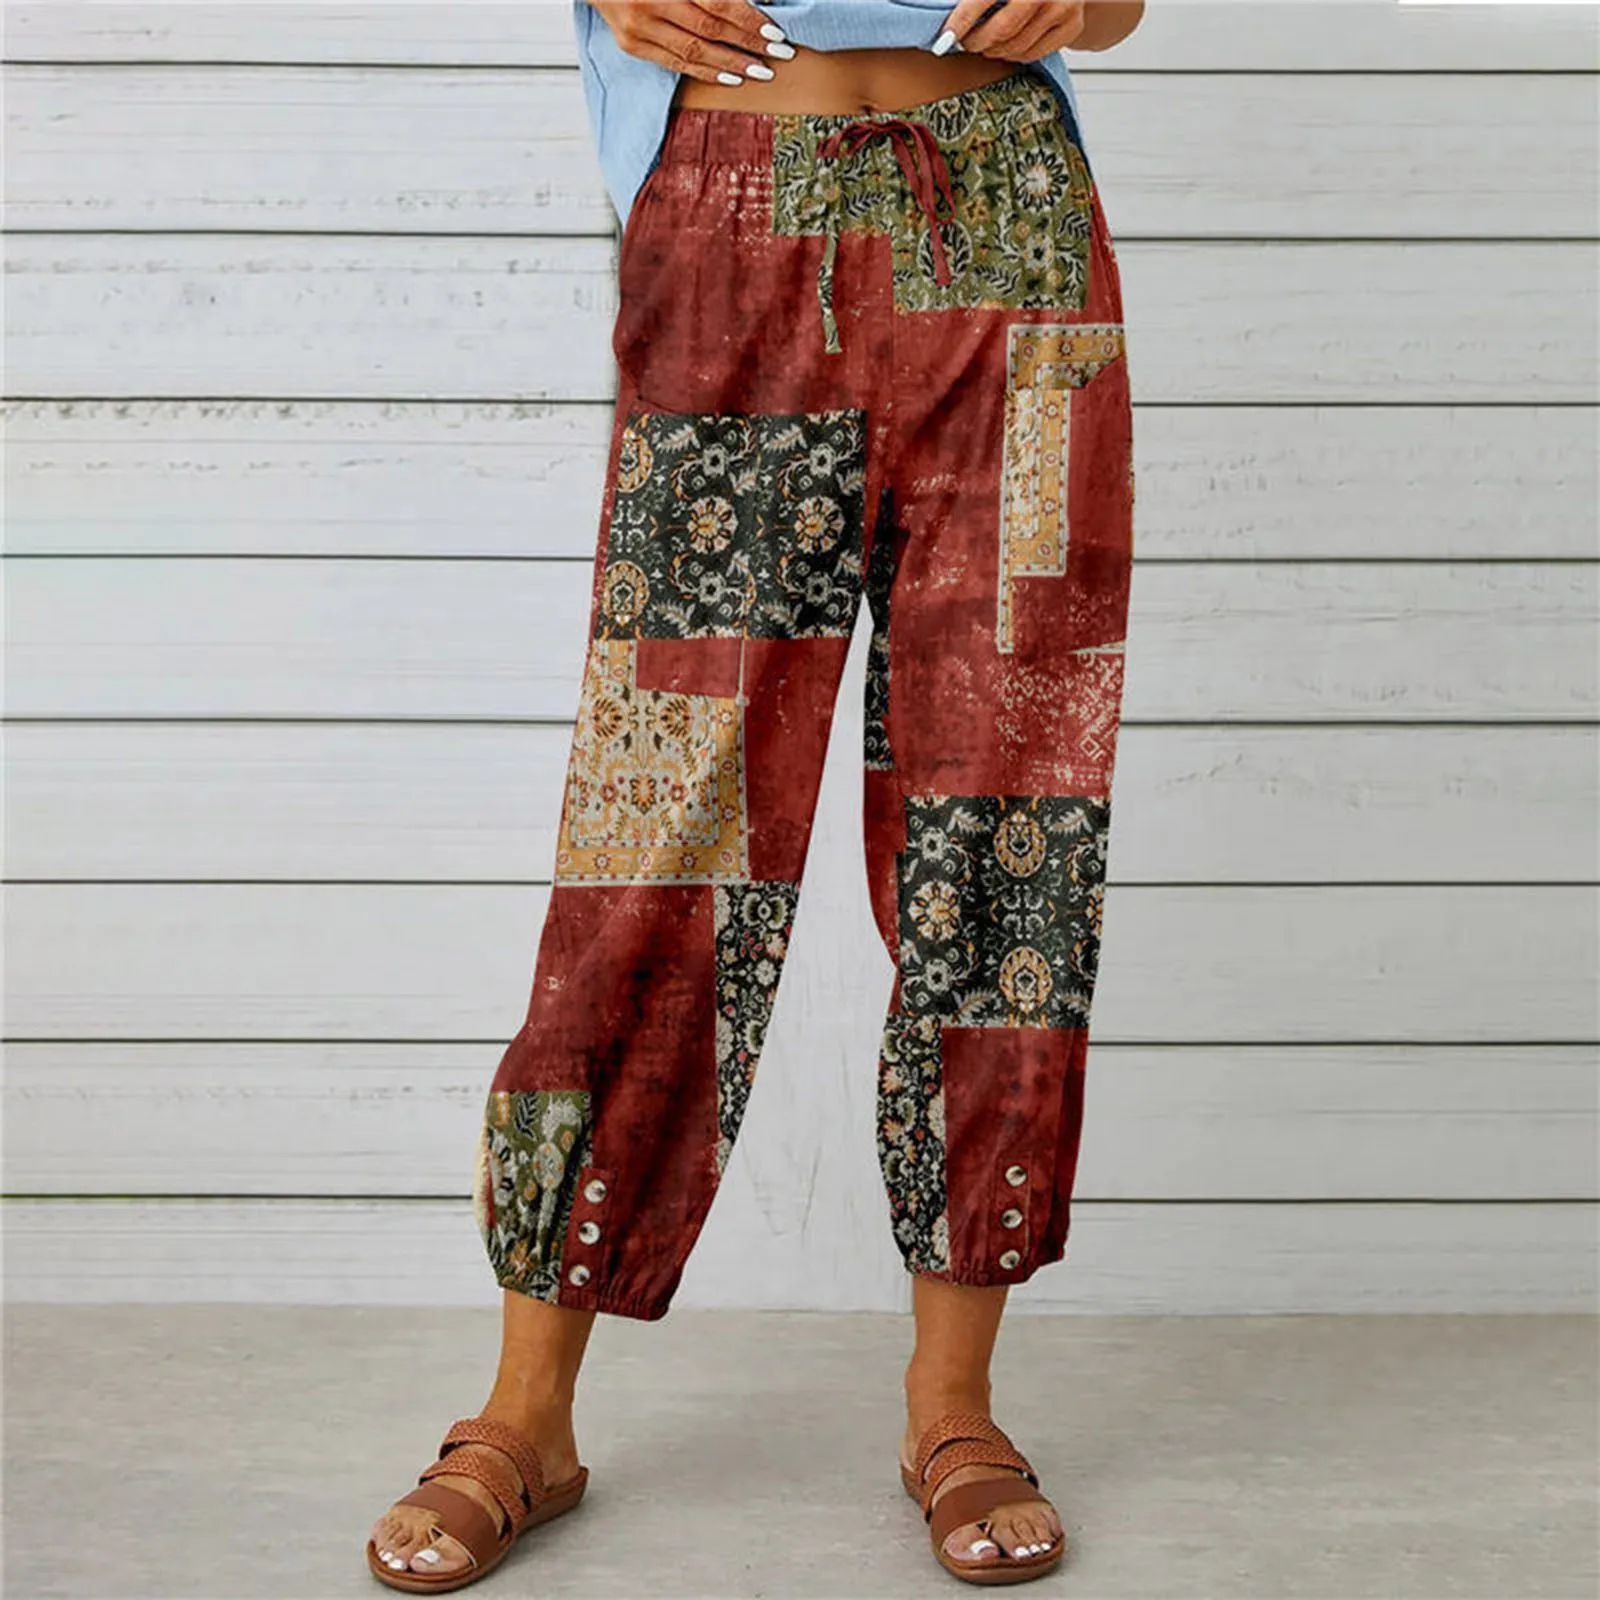 

Cropped Pants Women Capri High Waist Pants Drawstring Pants With Pockets Wide Leg Trousers Western Ethnic Block Womens Clothes